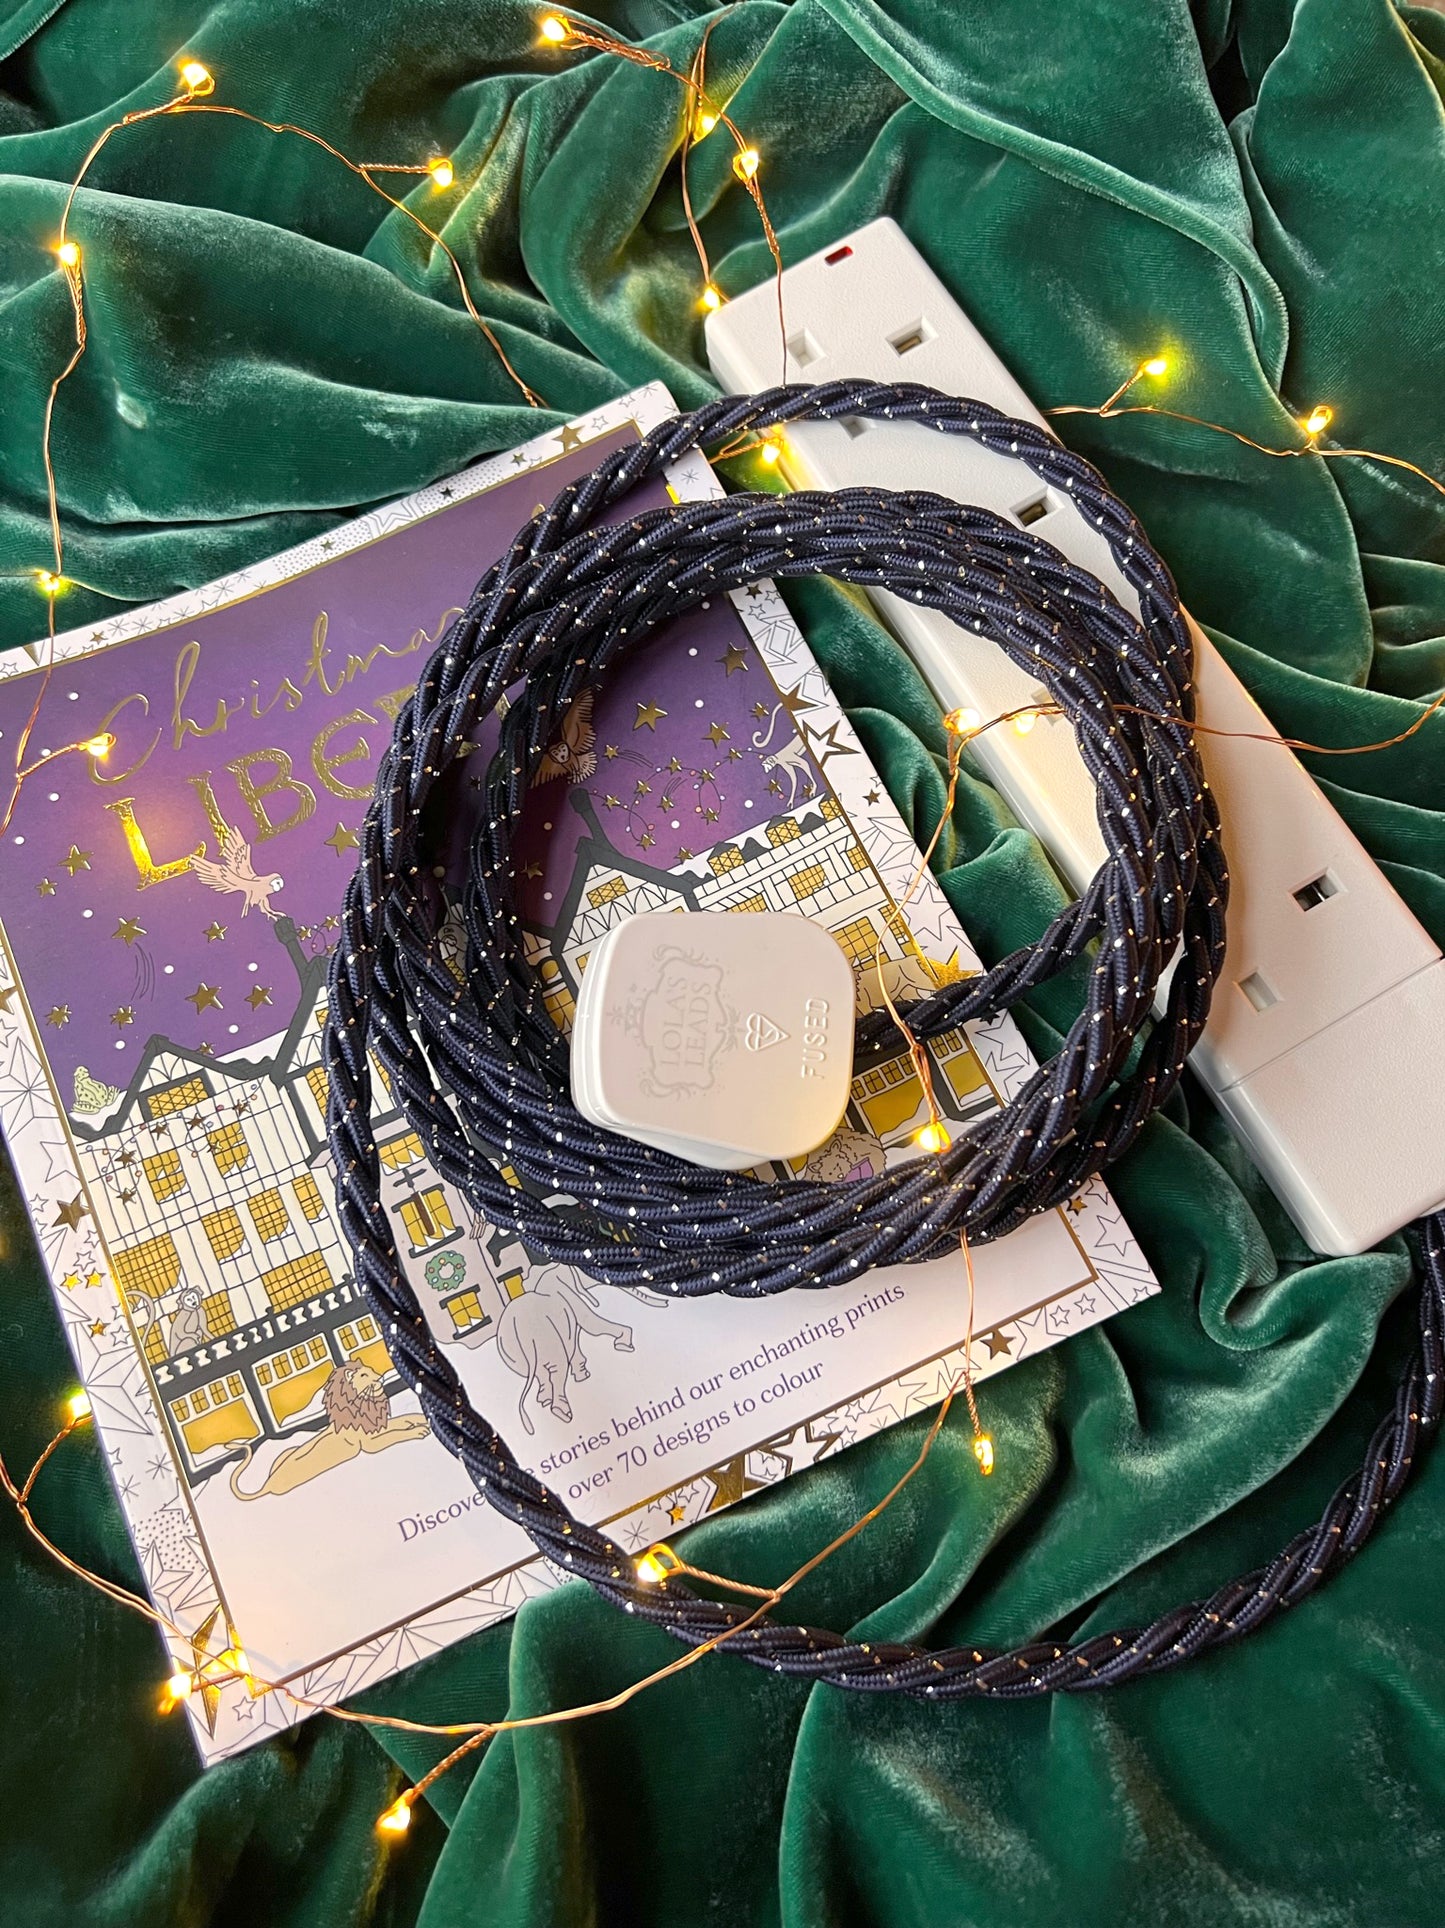 Starry Night - Lola's Leads Fabric Extension Cable